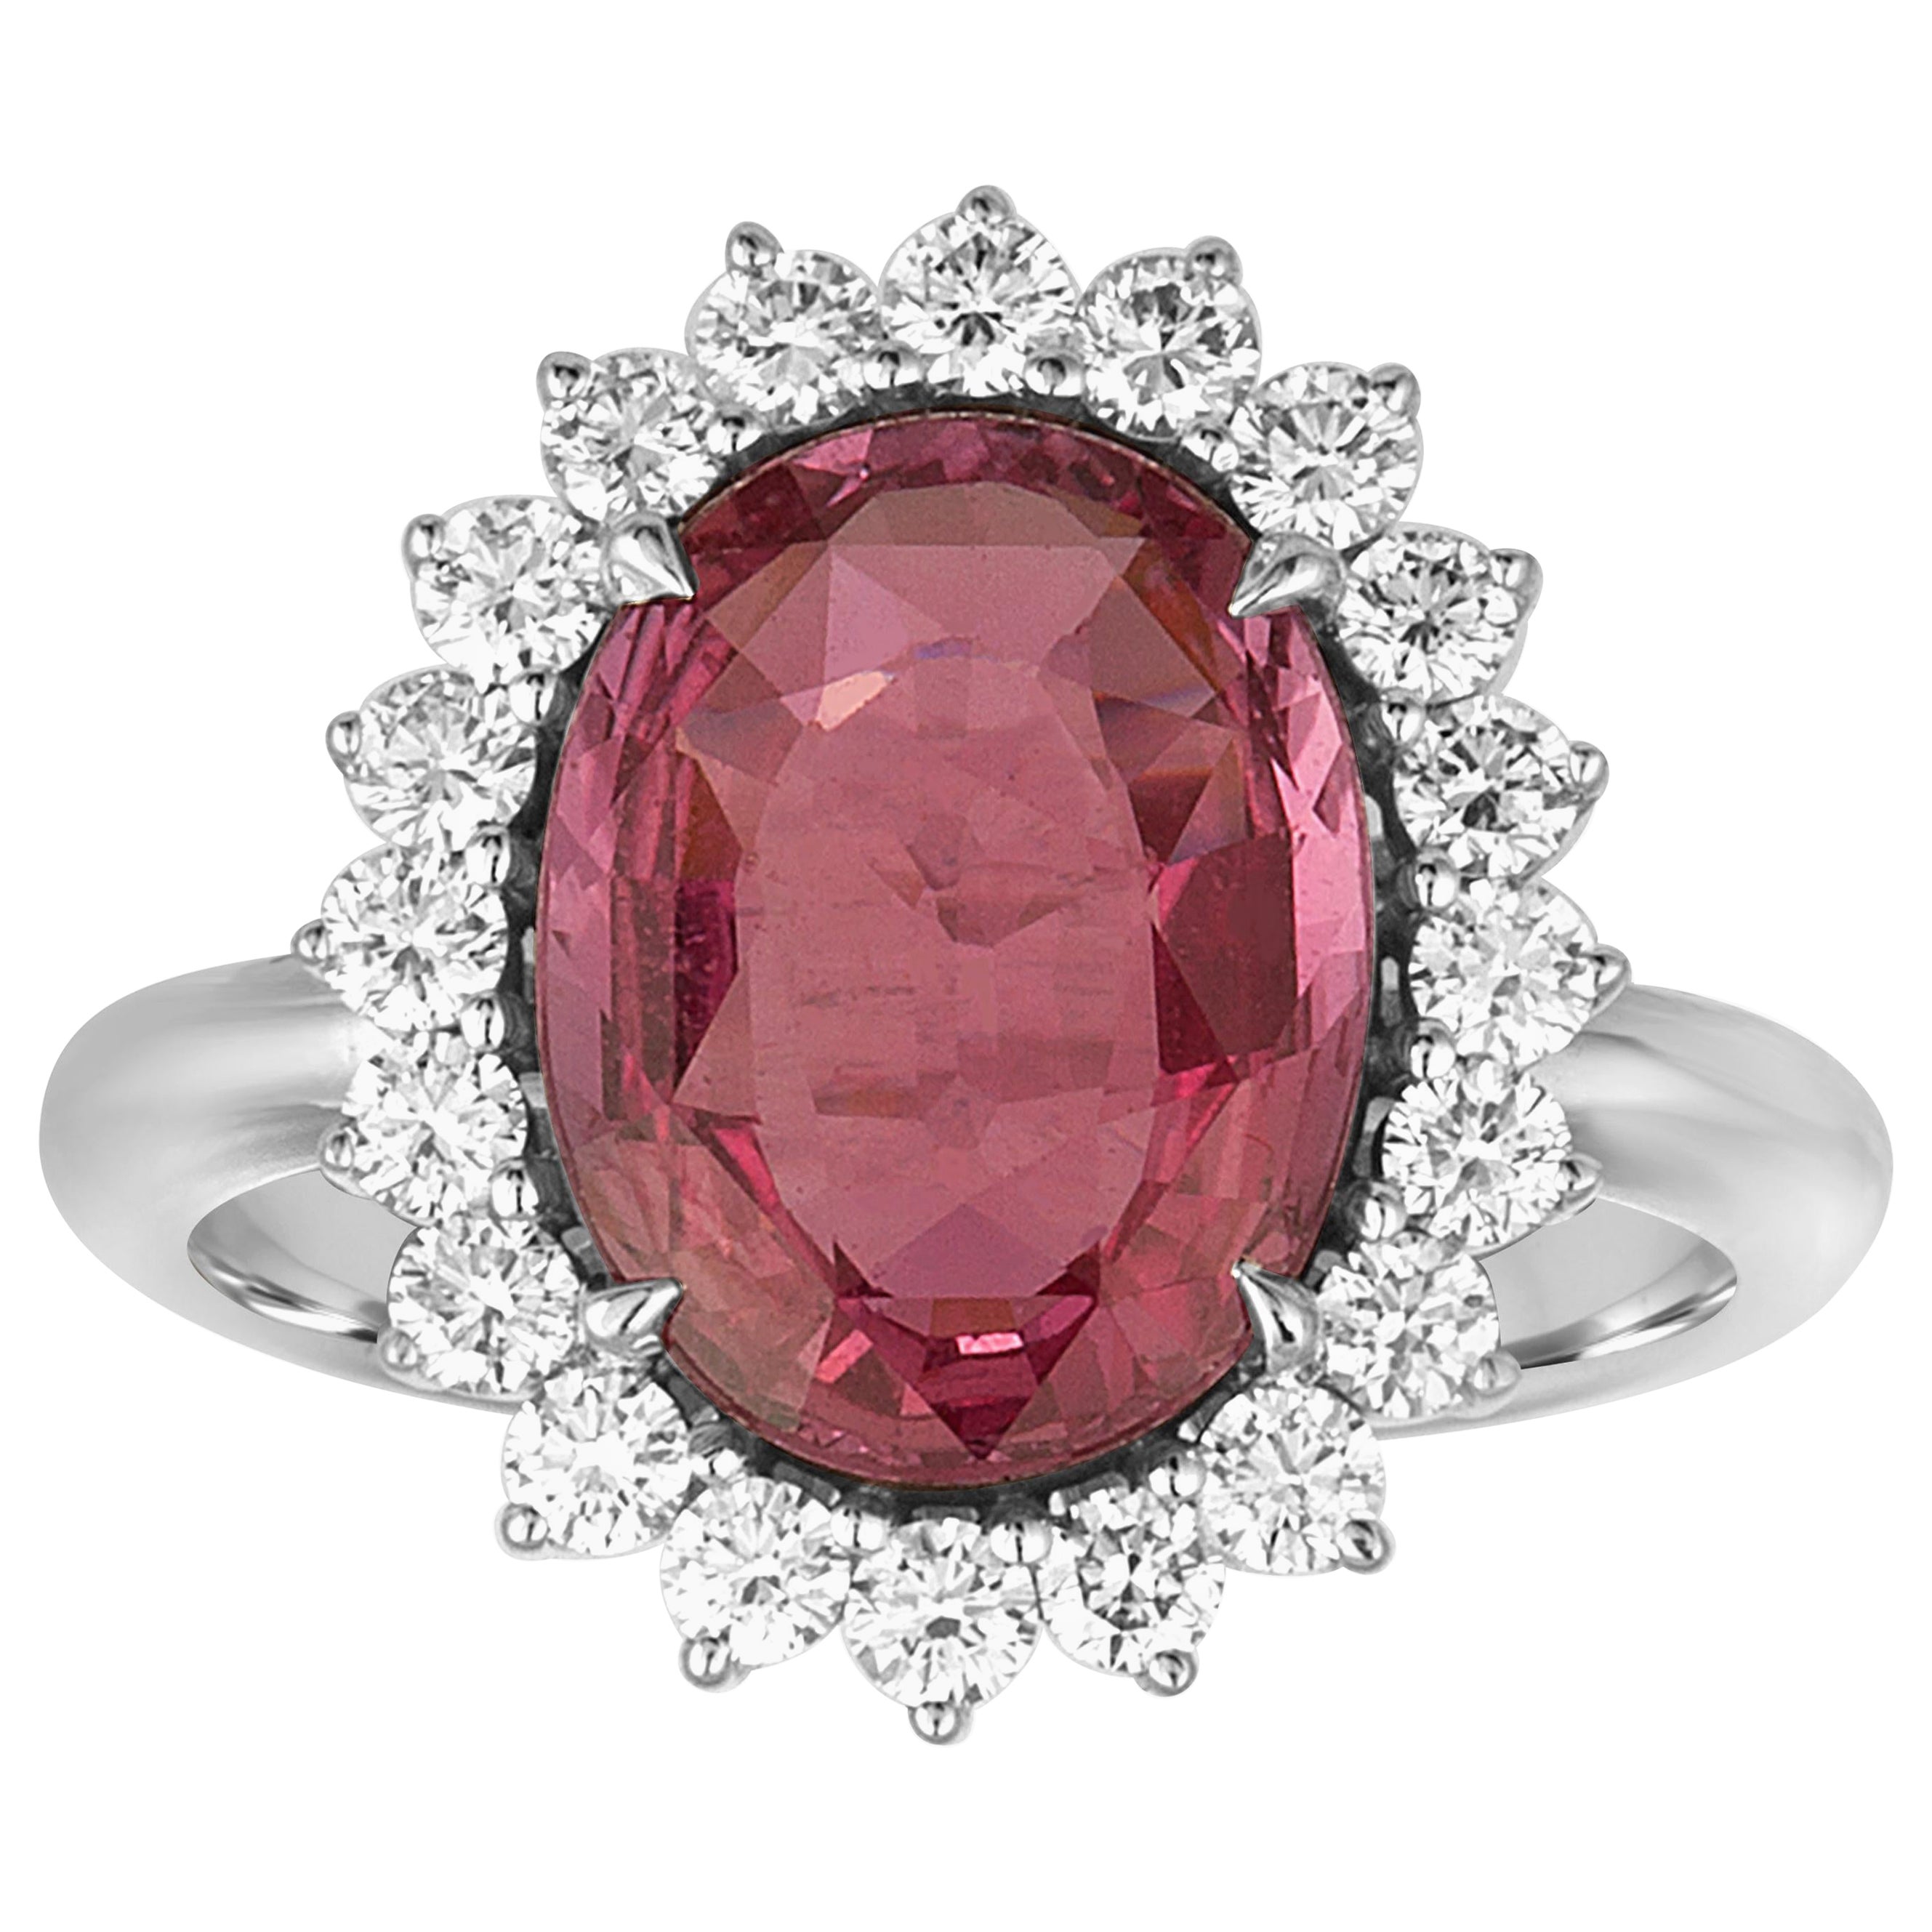 AGL Certified 4.06 Carat Oval Pink Sapphire Diamond Gold Ring